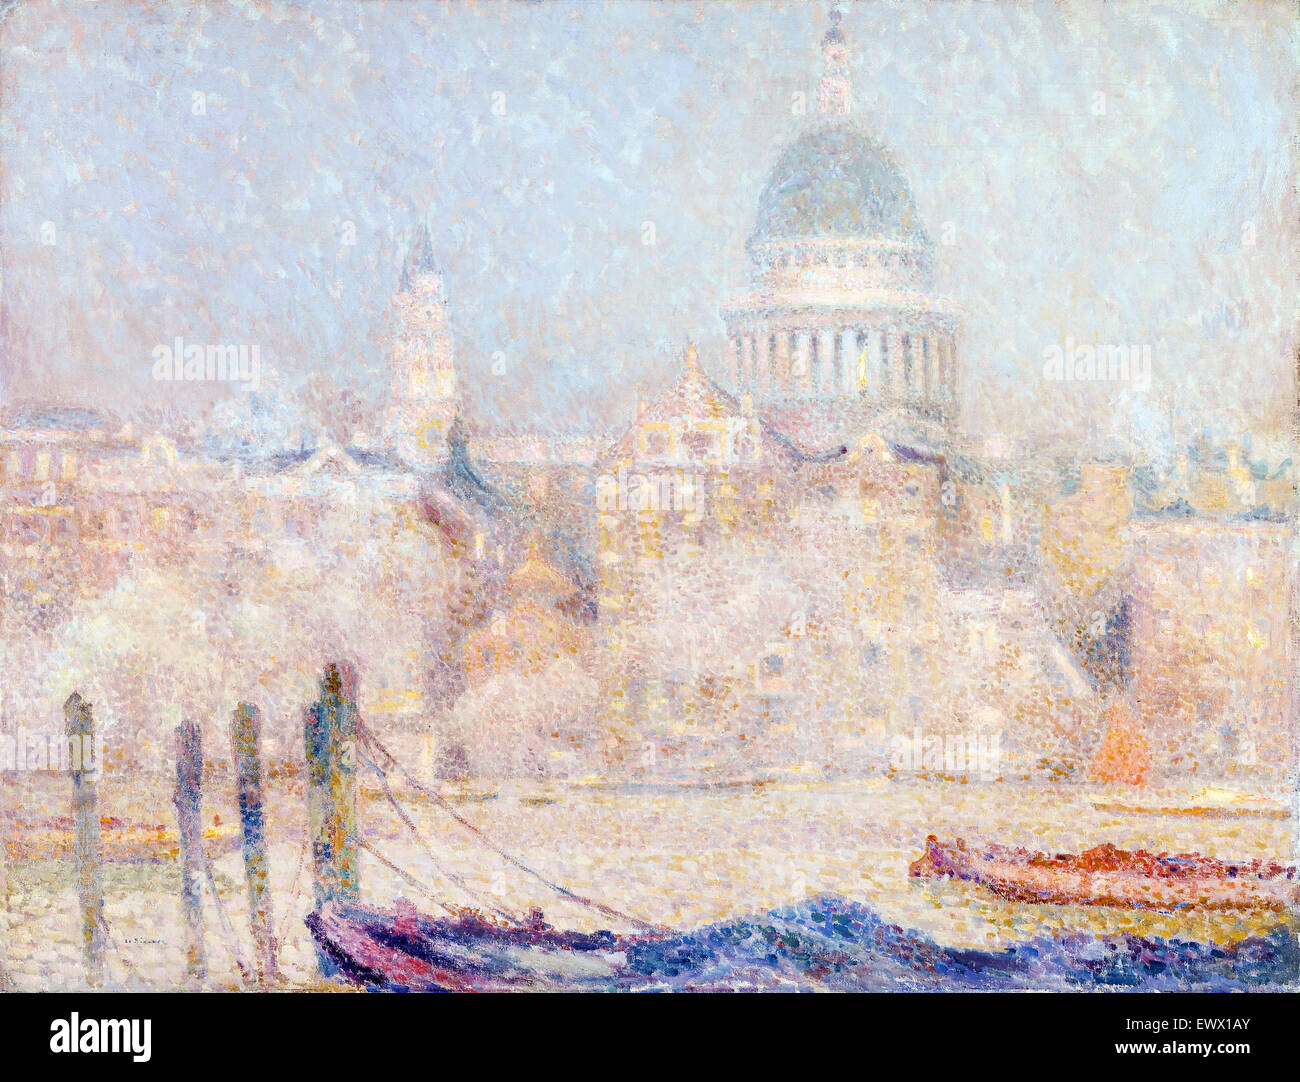 Henri Le Sidaner, St. Paul’s from the River: Morning Sun in Winter 1906-1907 Oil on canvas. Walker Art Gallery, Liverpool, UK. Stock Photo